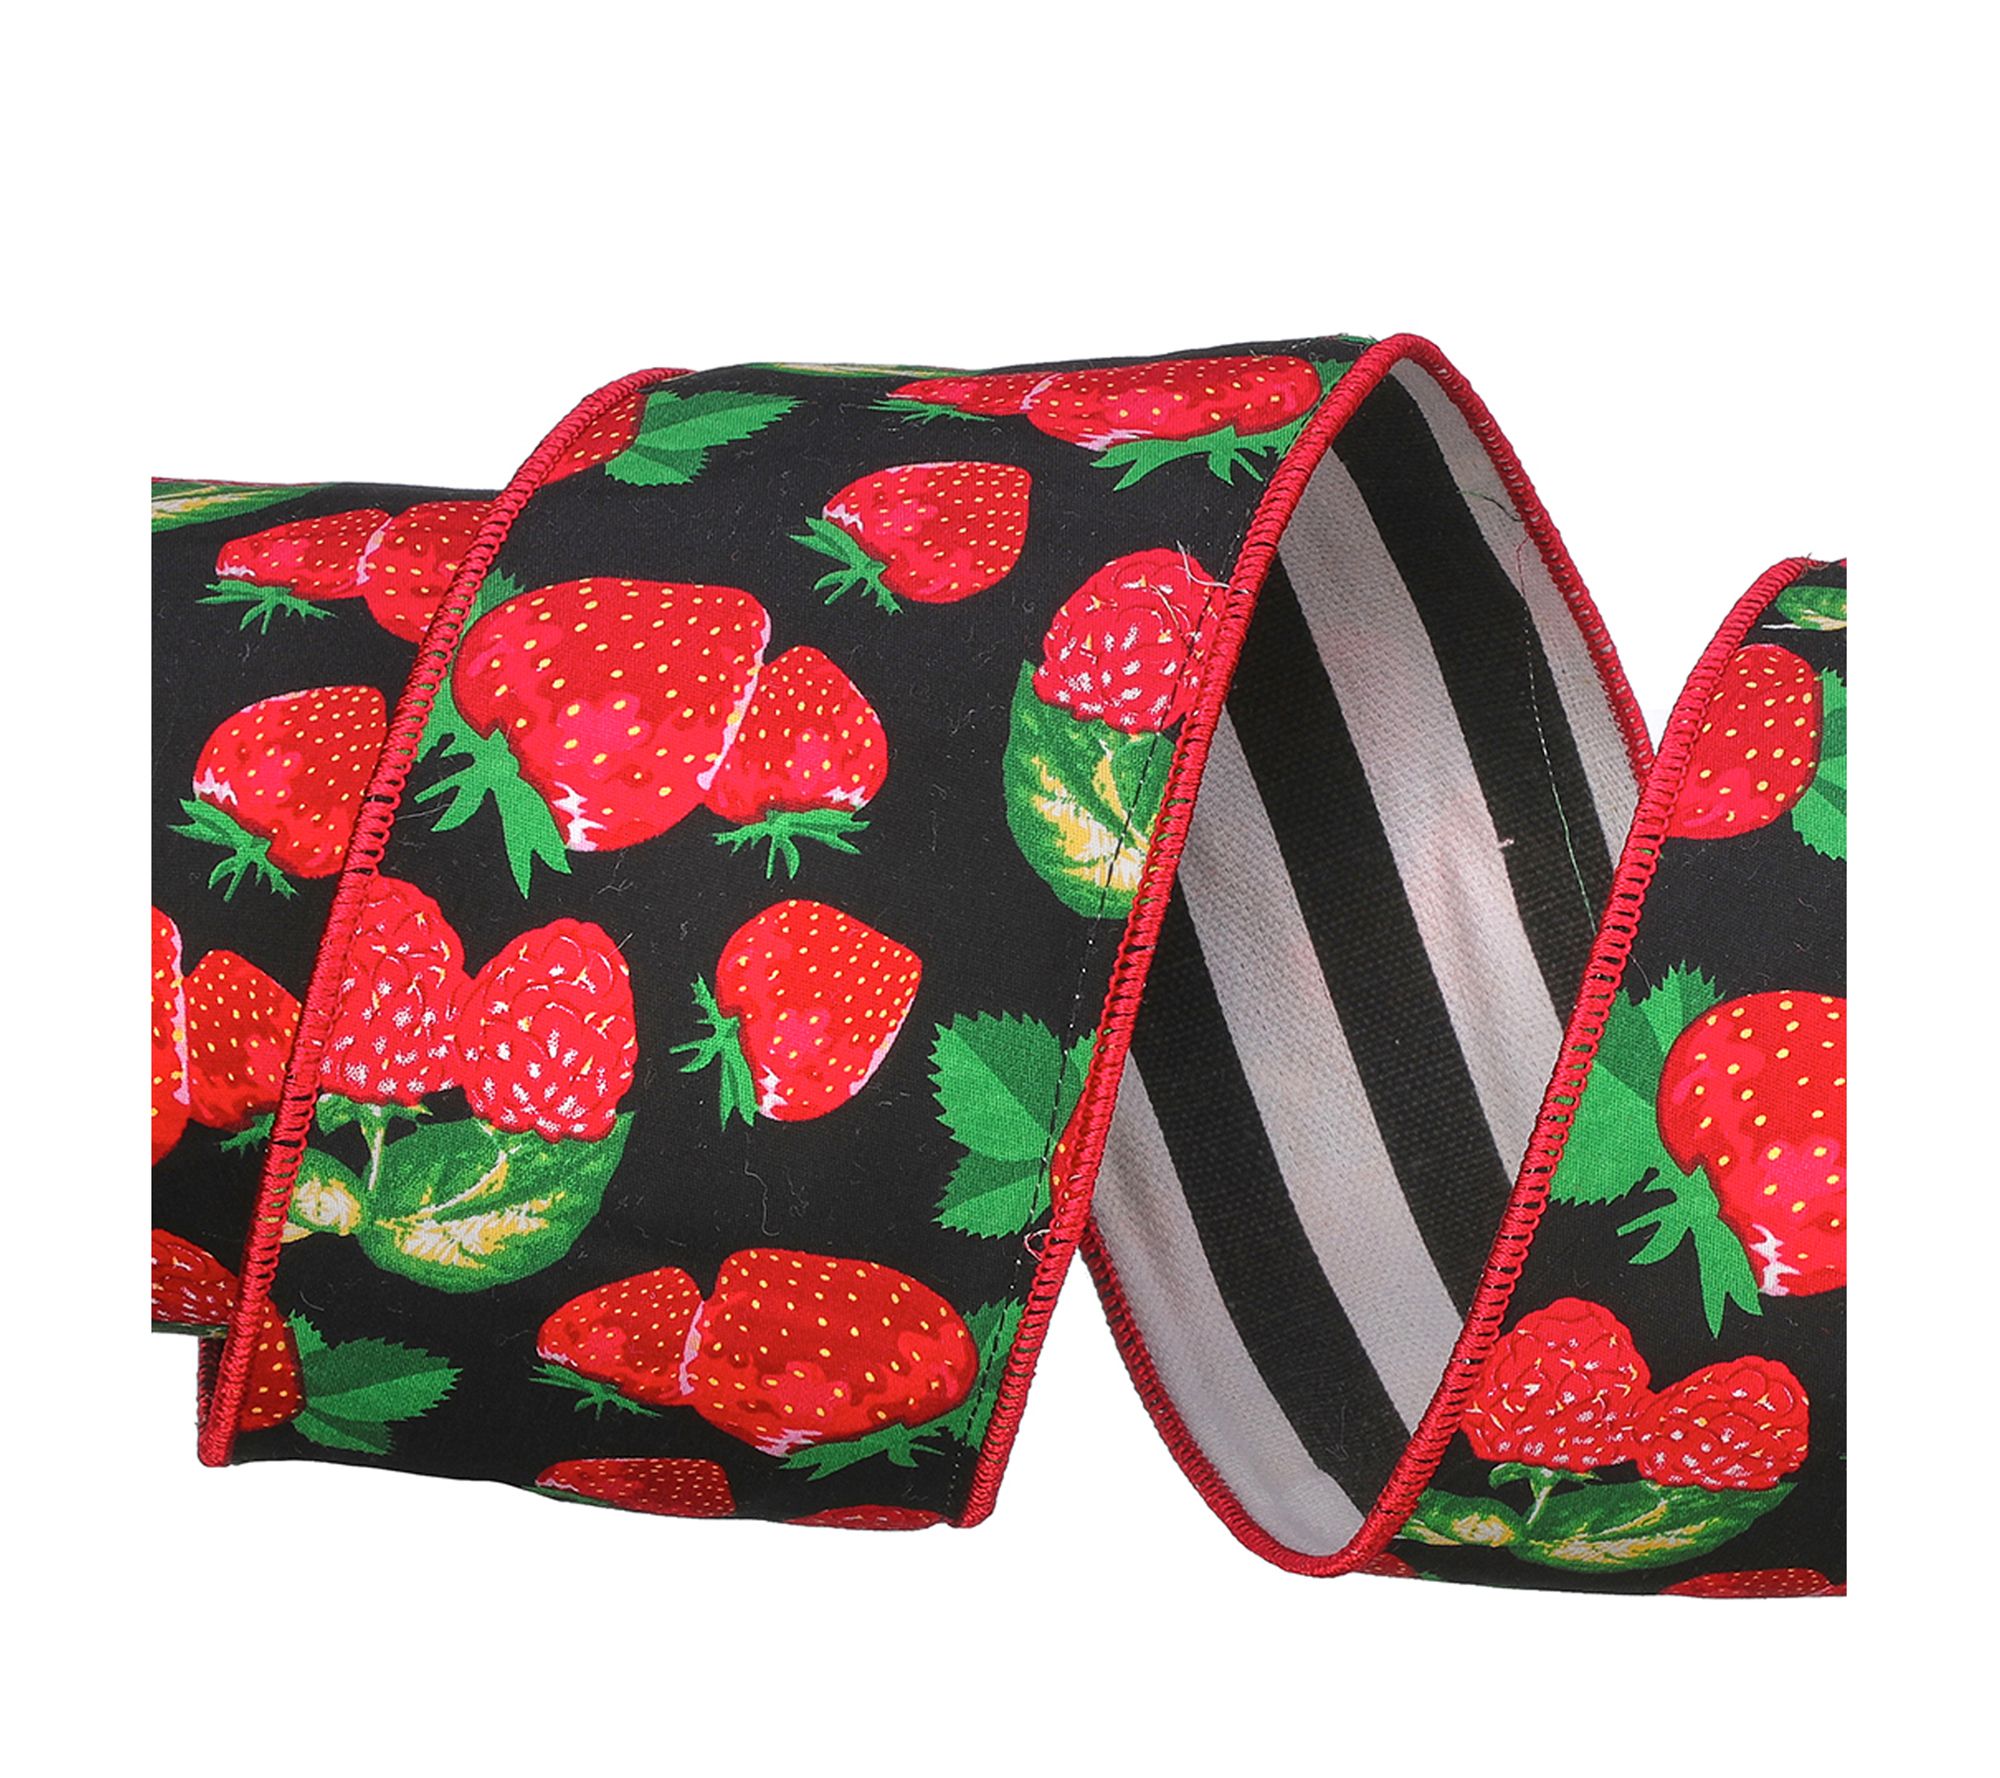 4 x 10 Yards Strawberry Ribbon with Stripe Backing by Valerie